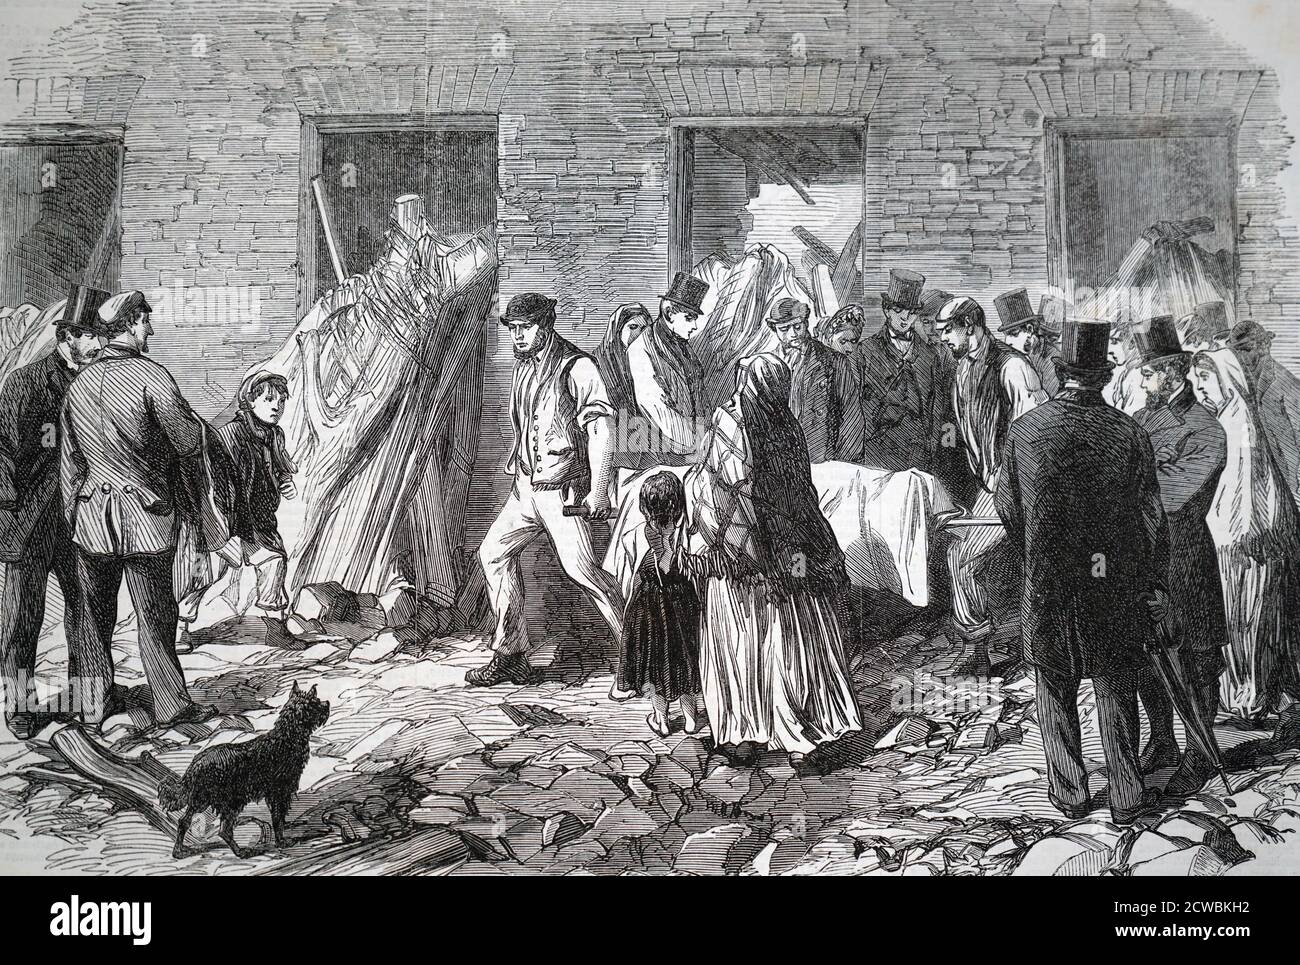 Engraving depicting the aftermath of the flooding of Sheffield and its environs due to failure of the Dale Dyke of the Bradfield Reservoir: 11 March 1864. There was extensive damage and loss of life. Dead bodies are being taken away to the receiving house at Malin Bridge. Stock Photo